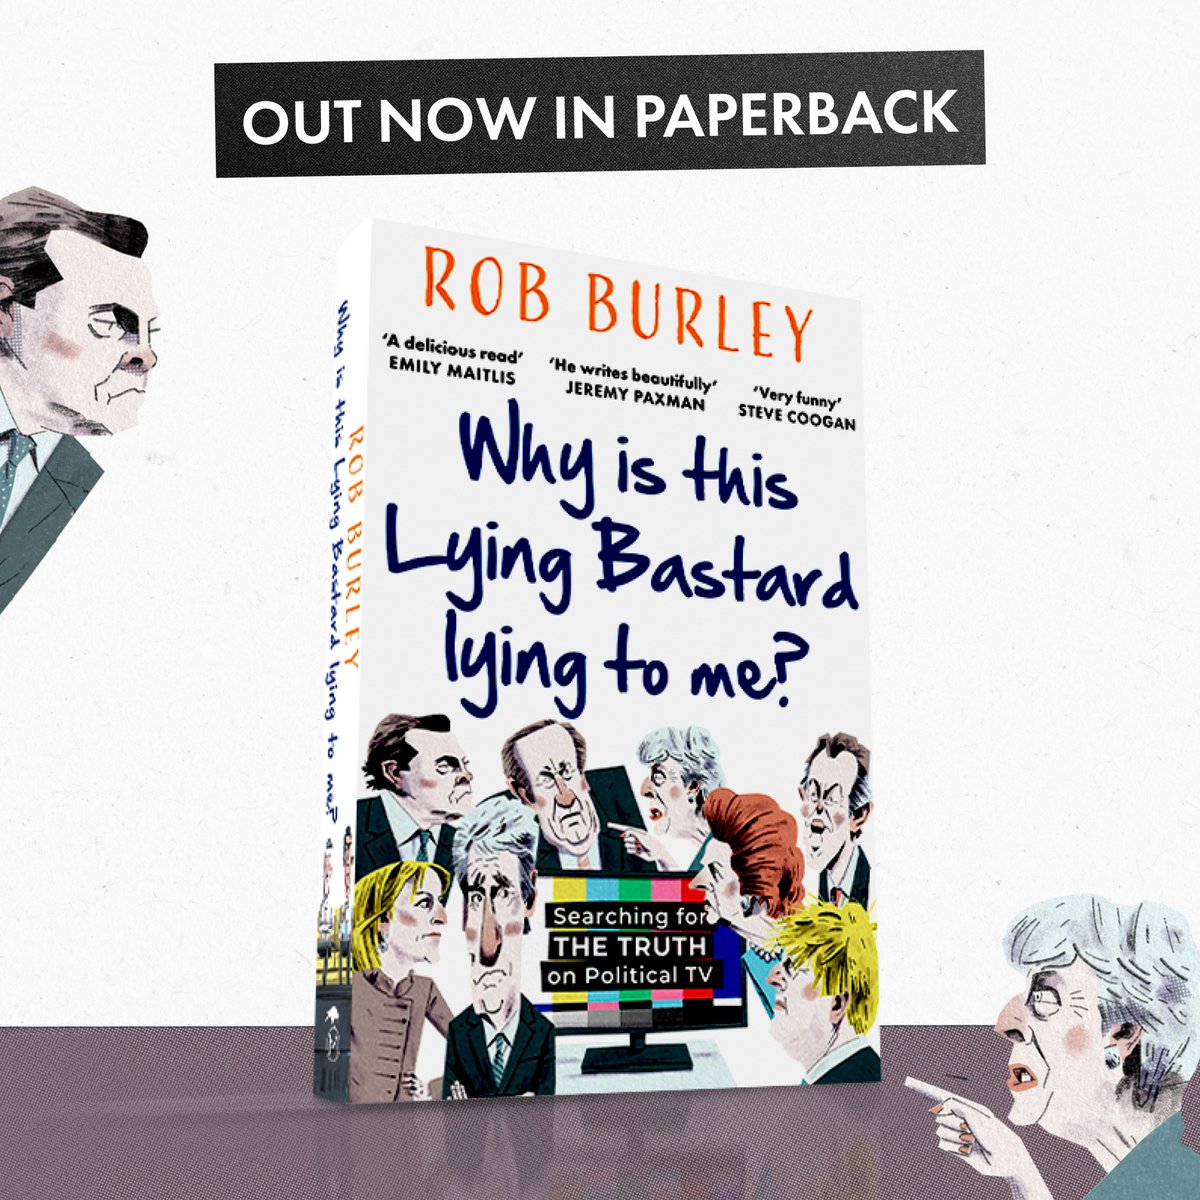 Out today in paperback! @RobBurl's Why is this Lying Bastard lying to me? An essential read in any election year. A gold star if you can tell us who the quote referenced in the title was originally attributed to: 'always ask yourself 'Why is this lying bastard lying to me?''⭐️